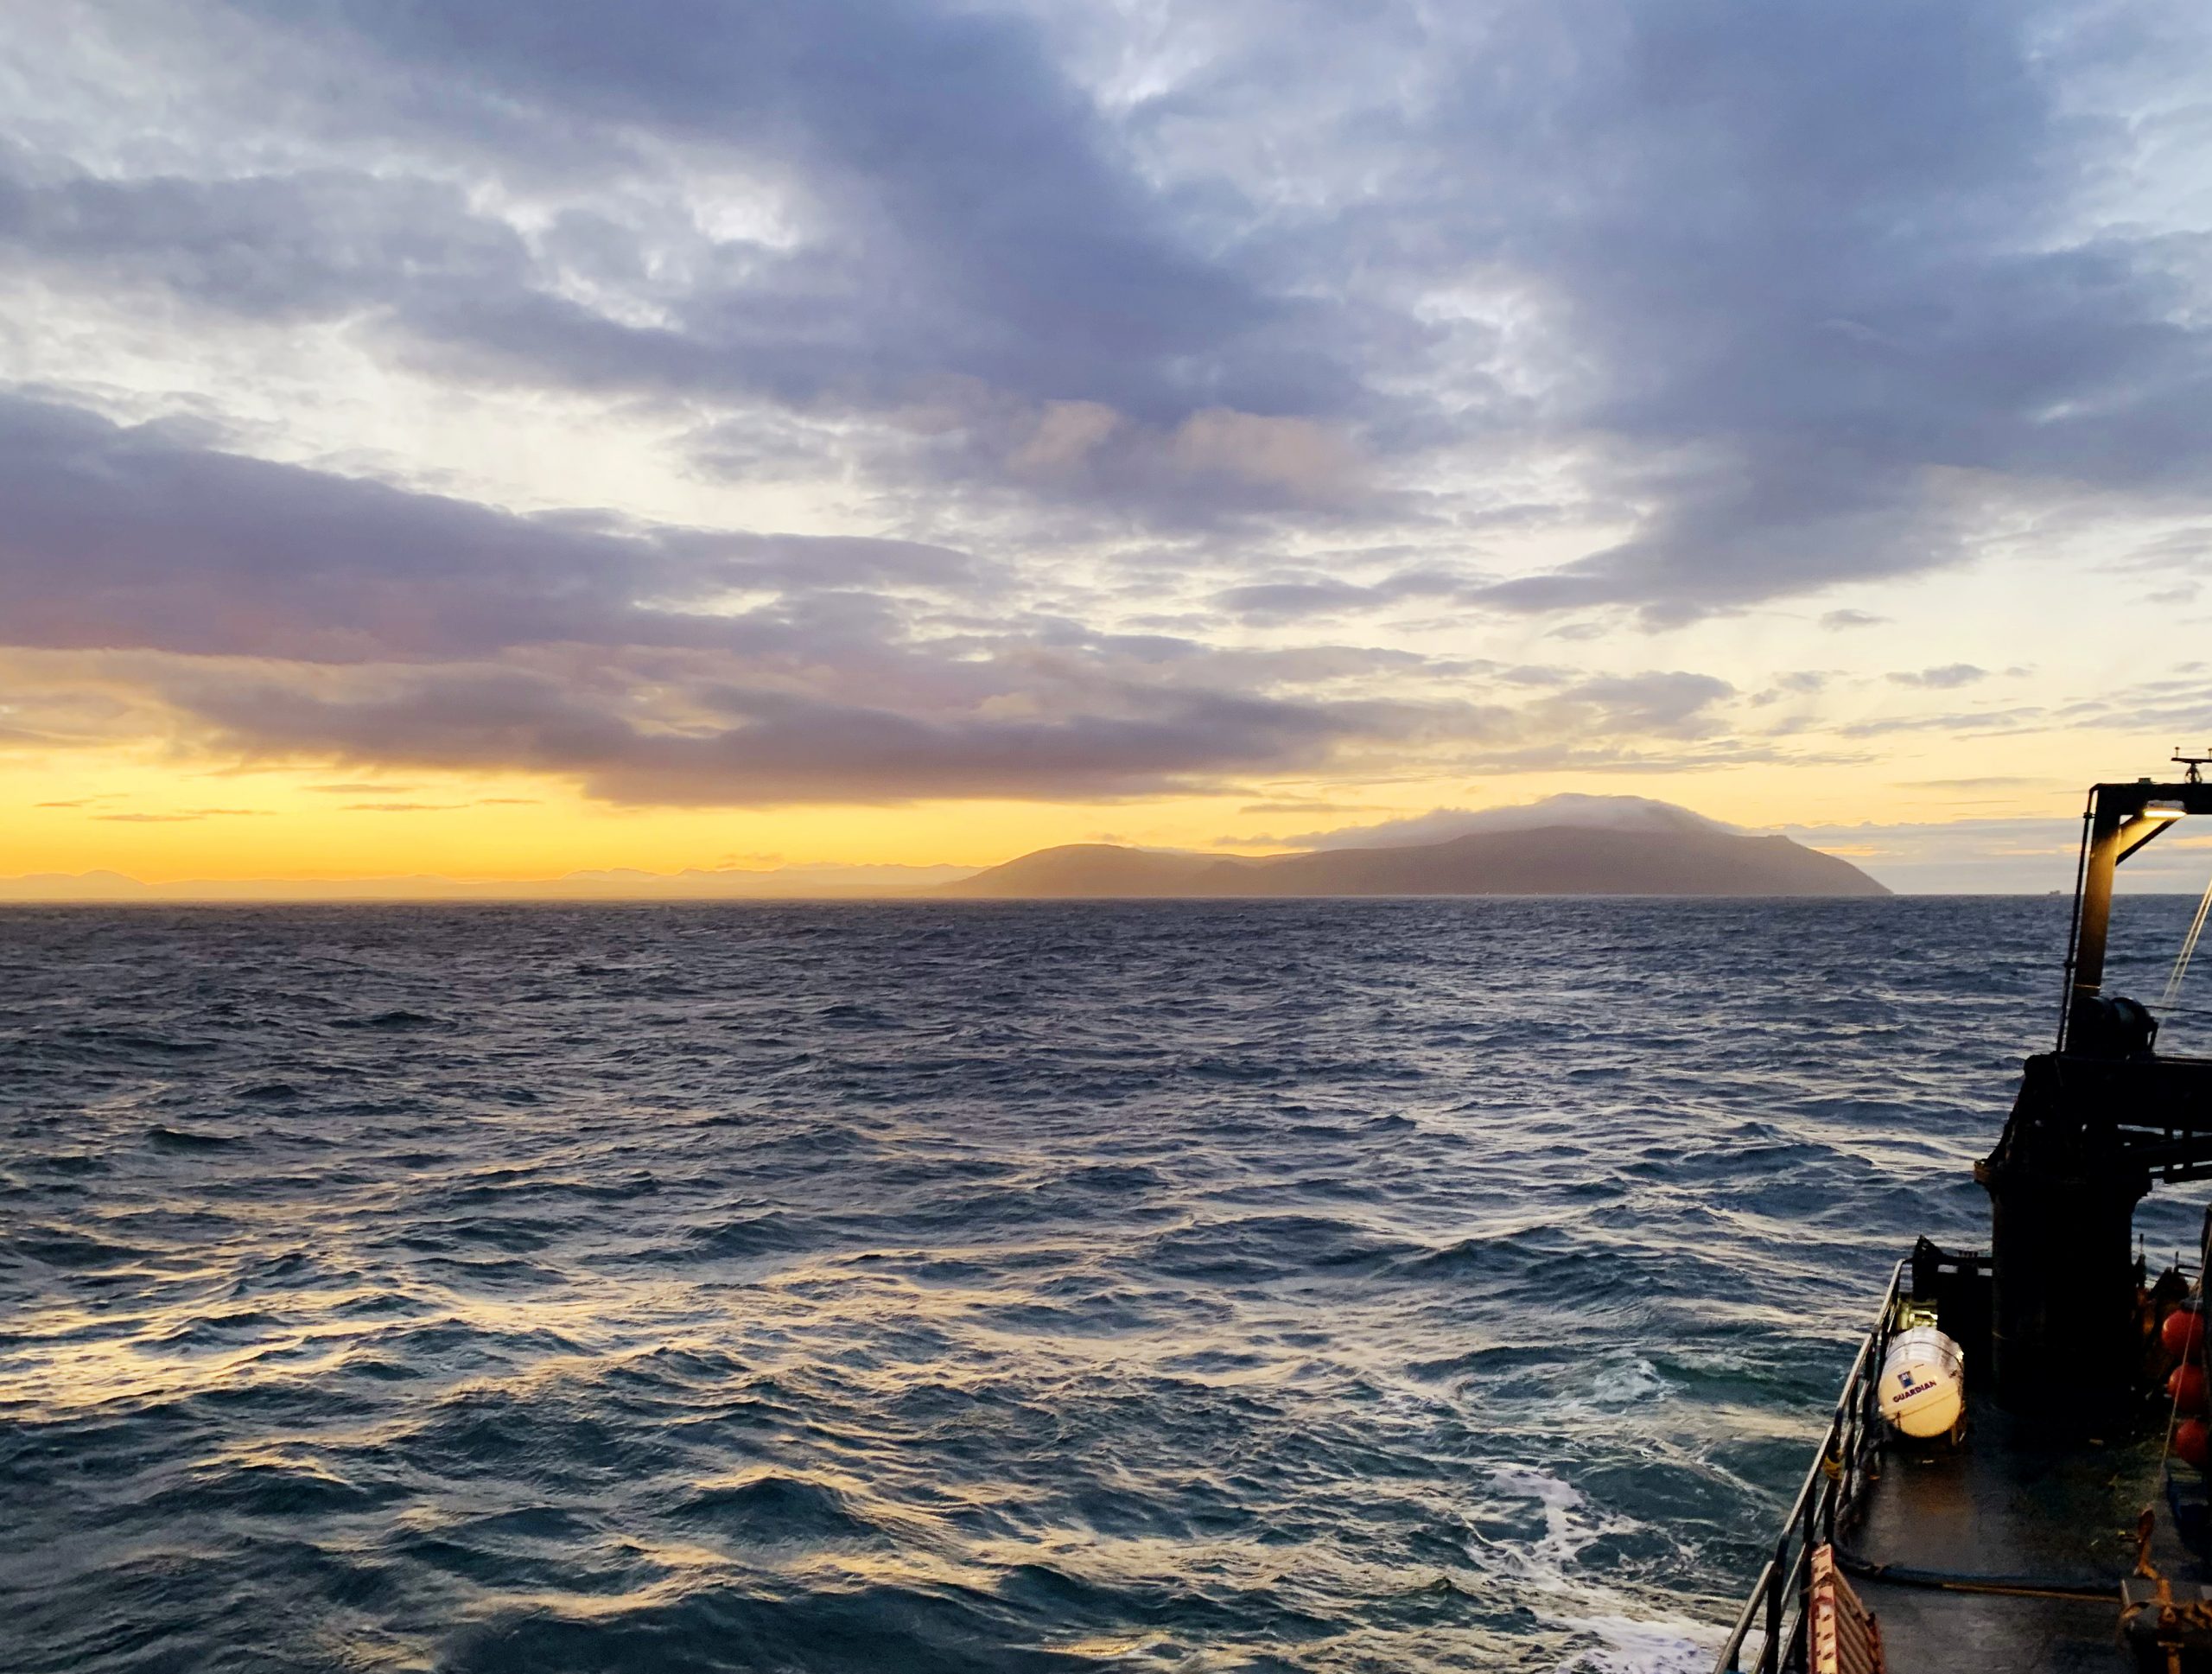 Photo by Jordi Maisch. The Cape Prince of Wales, the westernmost point of mainland North America, rises on the east coast of the Bering Strait in this view from the Norseman II in October 2020.